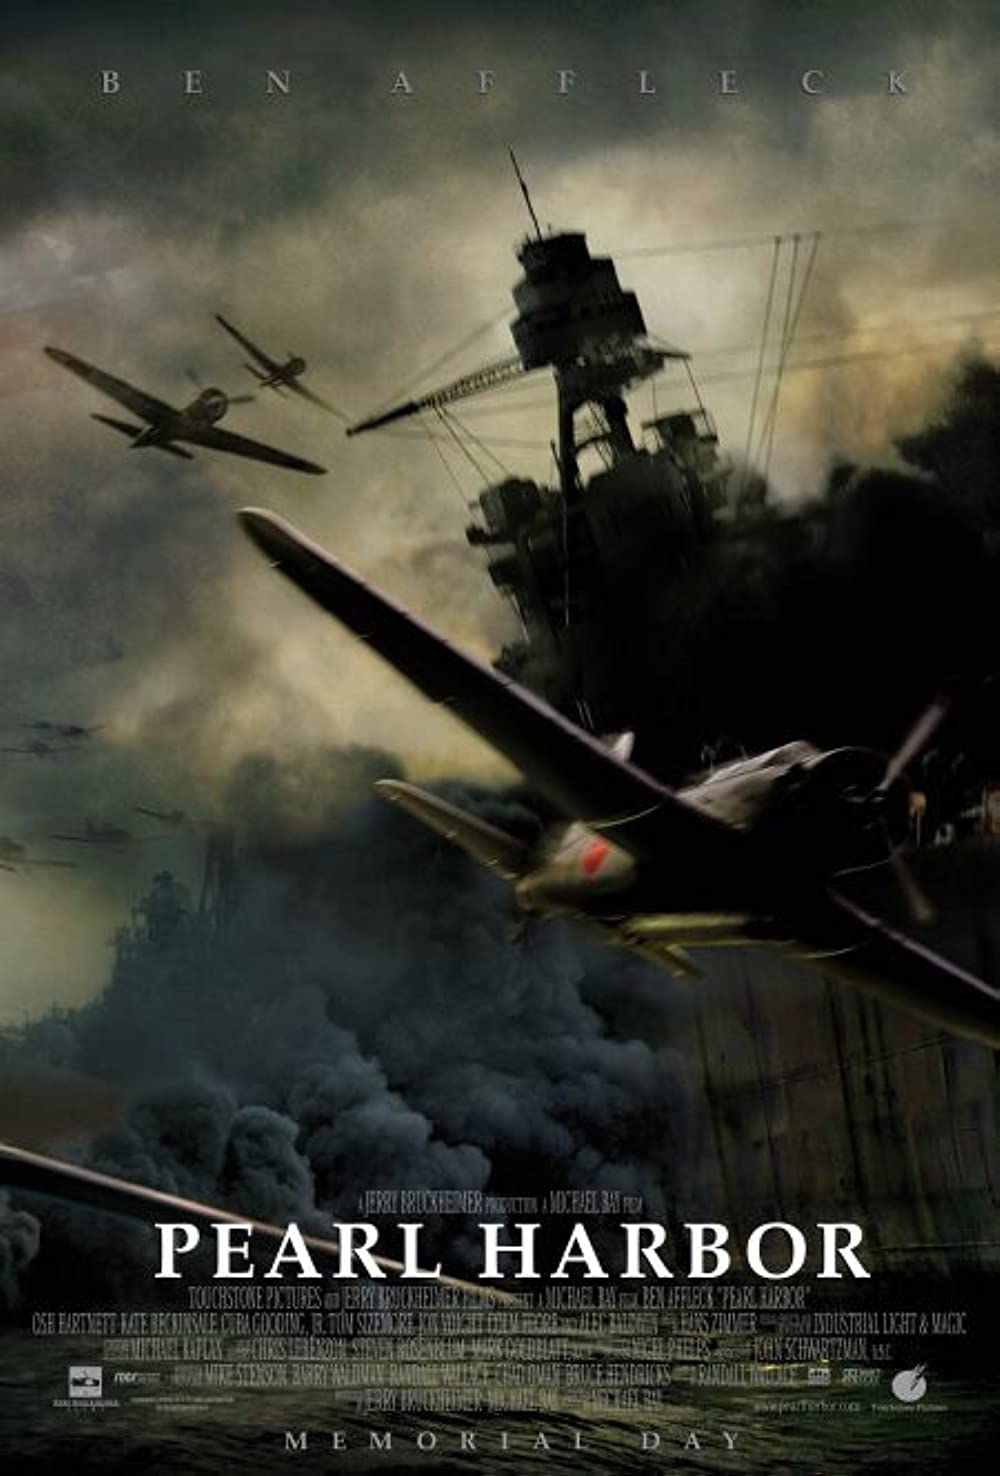 FULL MOVIE: Pearl Harbor (2001) [Action]